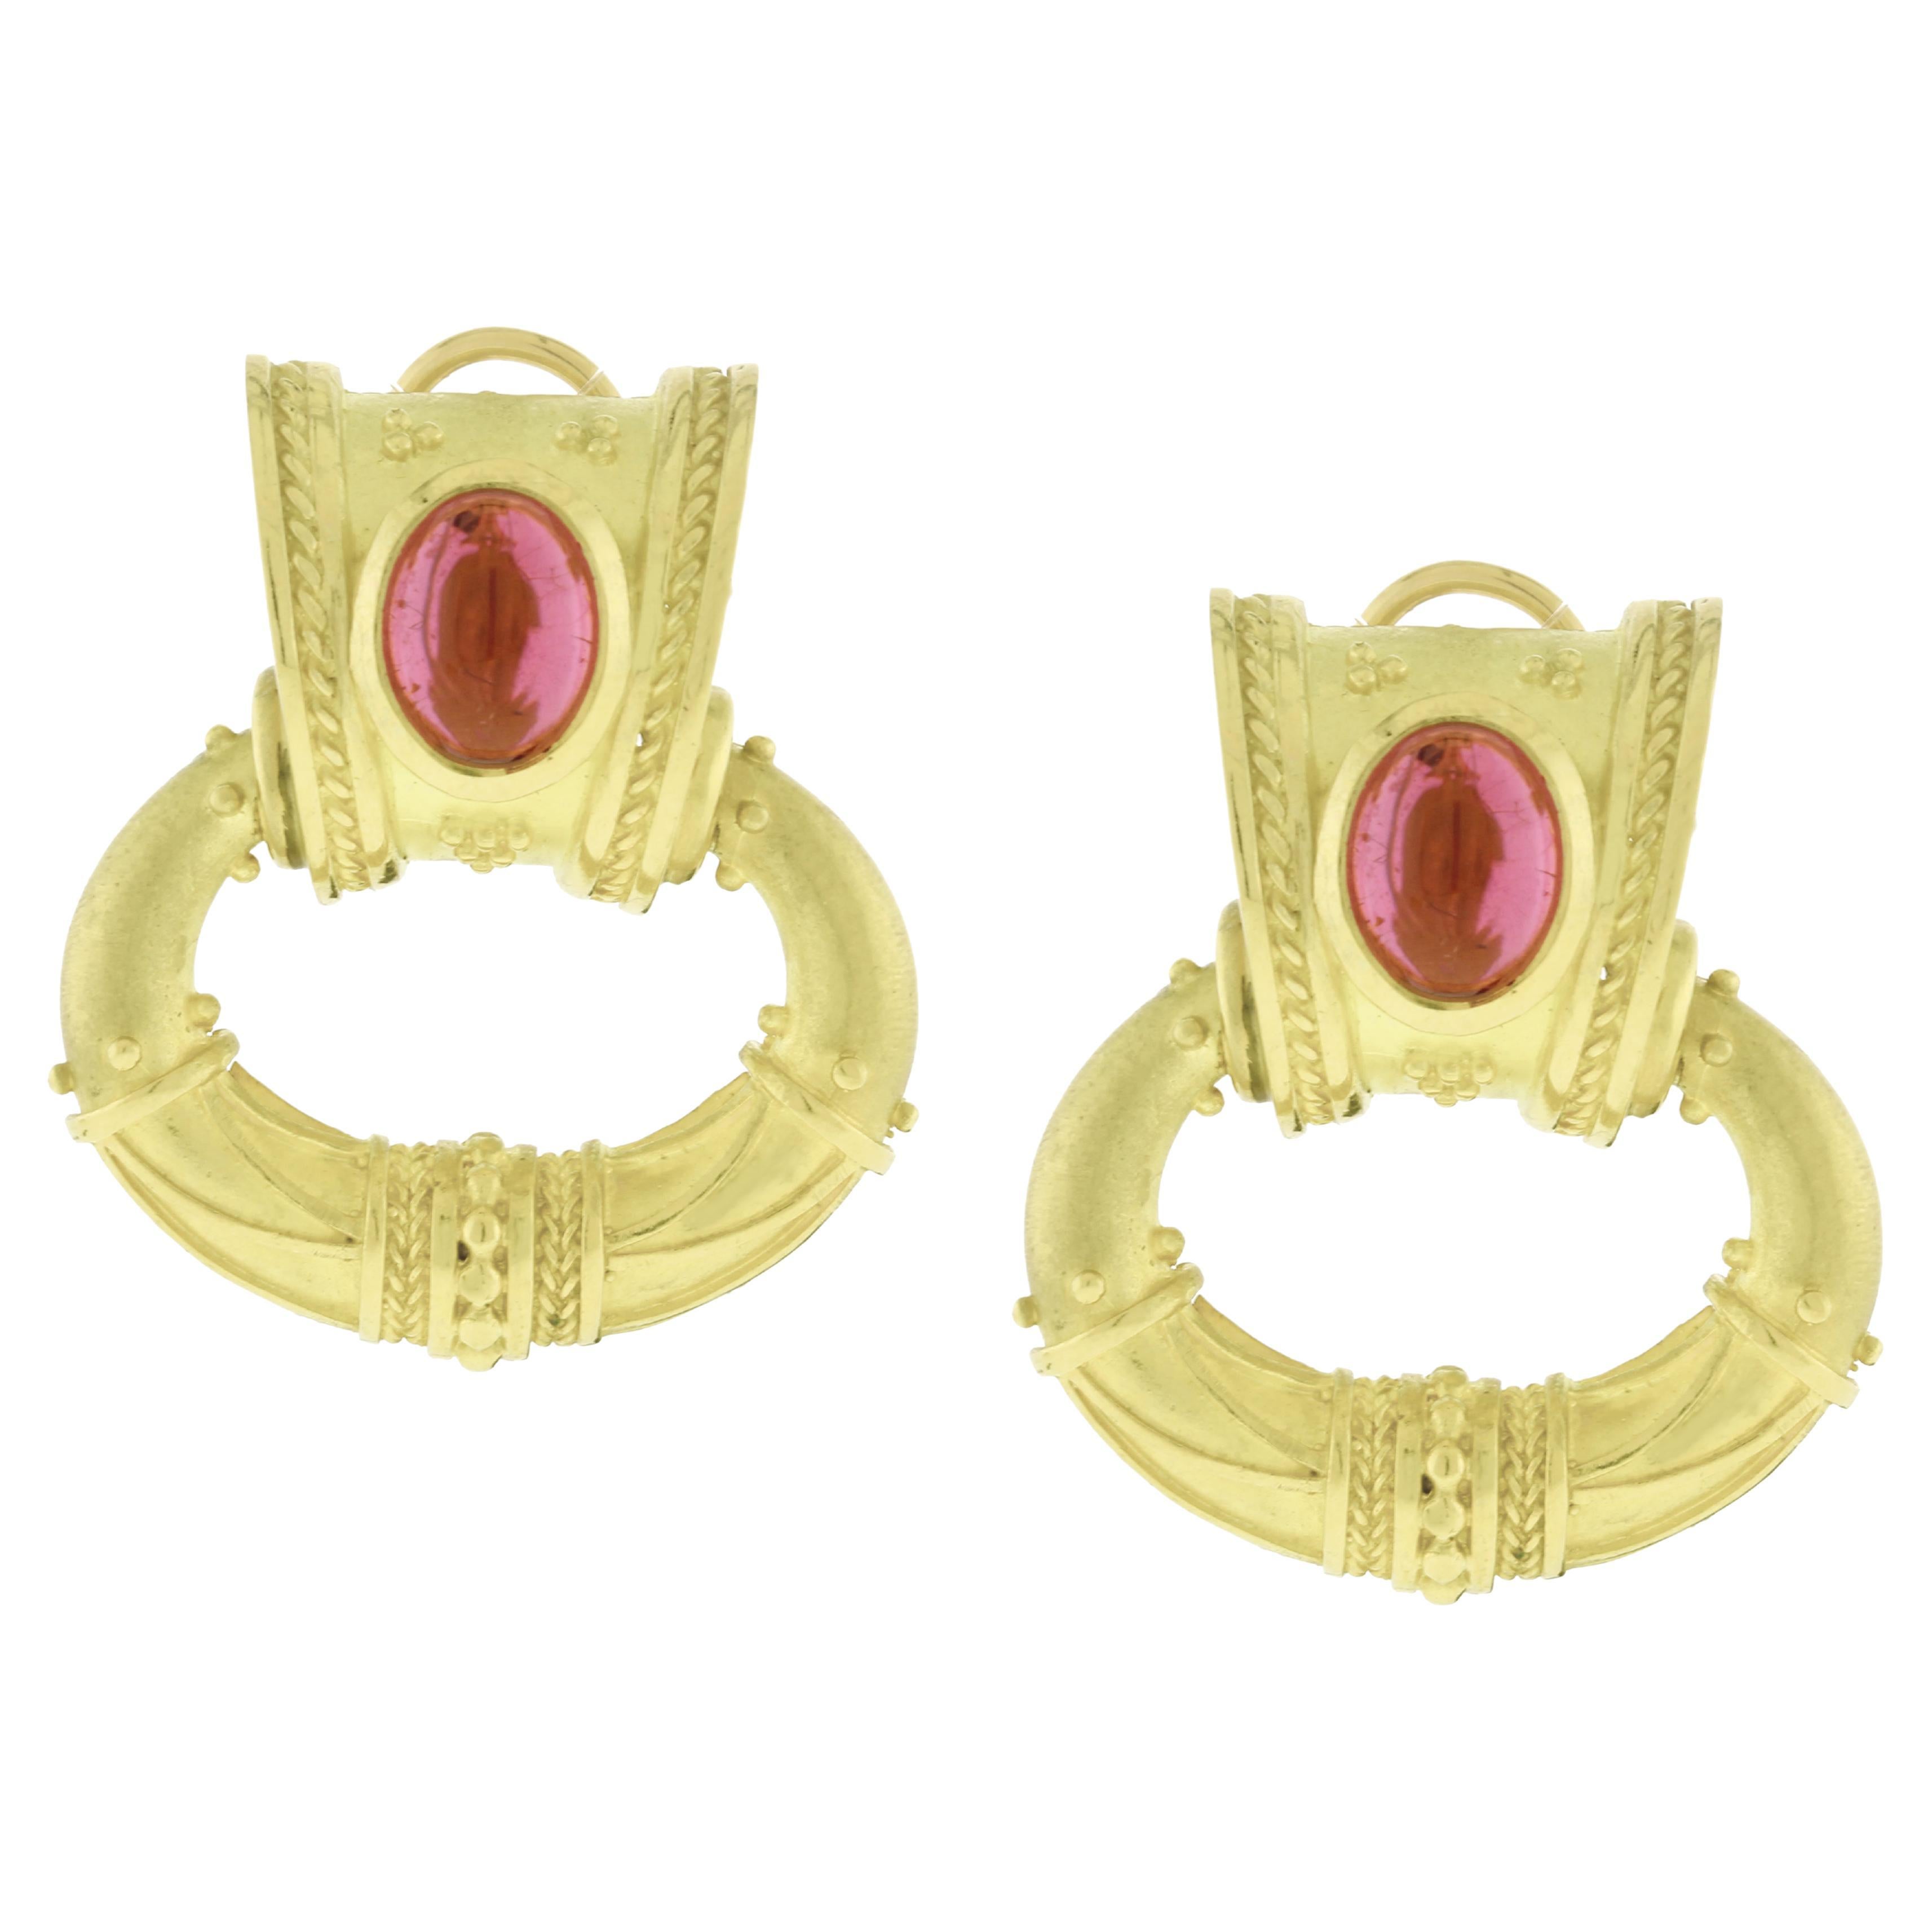 From the SeidenGang collection of antiquity-inspired jewelry a pair of cabochon pink Tourmaline earrings.  Carol Seiden and Carolyn Gang were inspired by a rare collection of Greek and Roman mythological designs.  The duo created jewelry that was